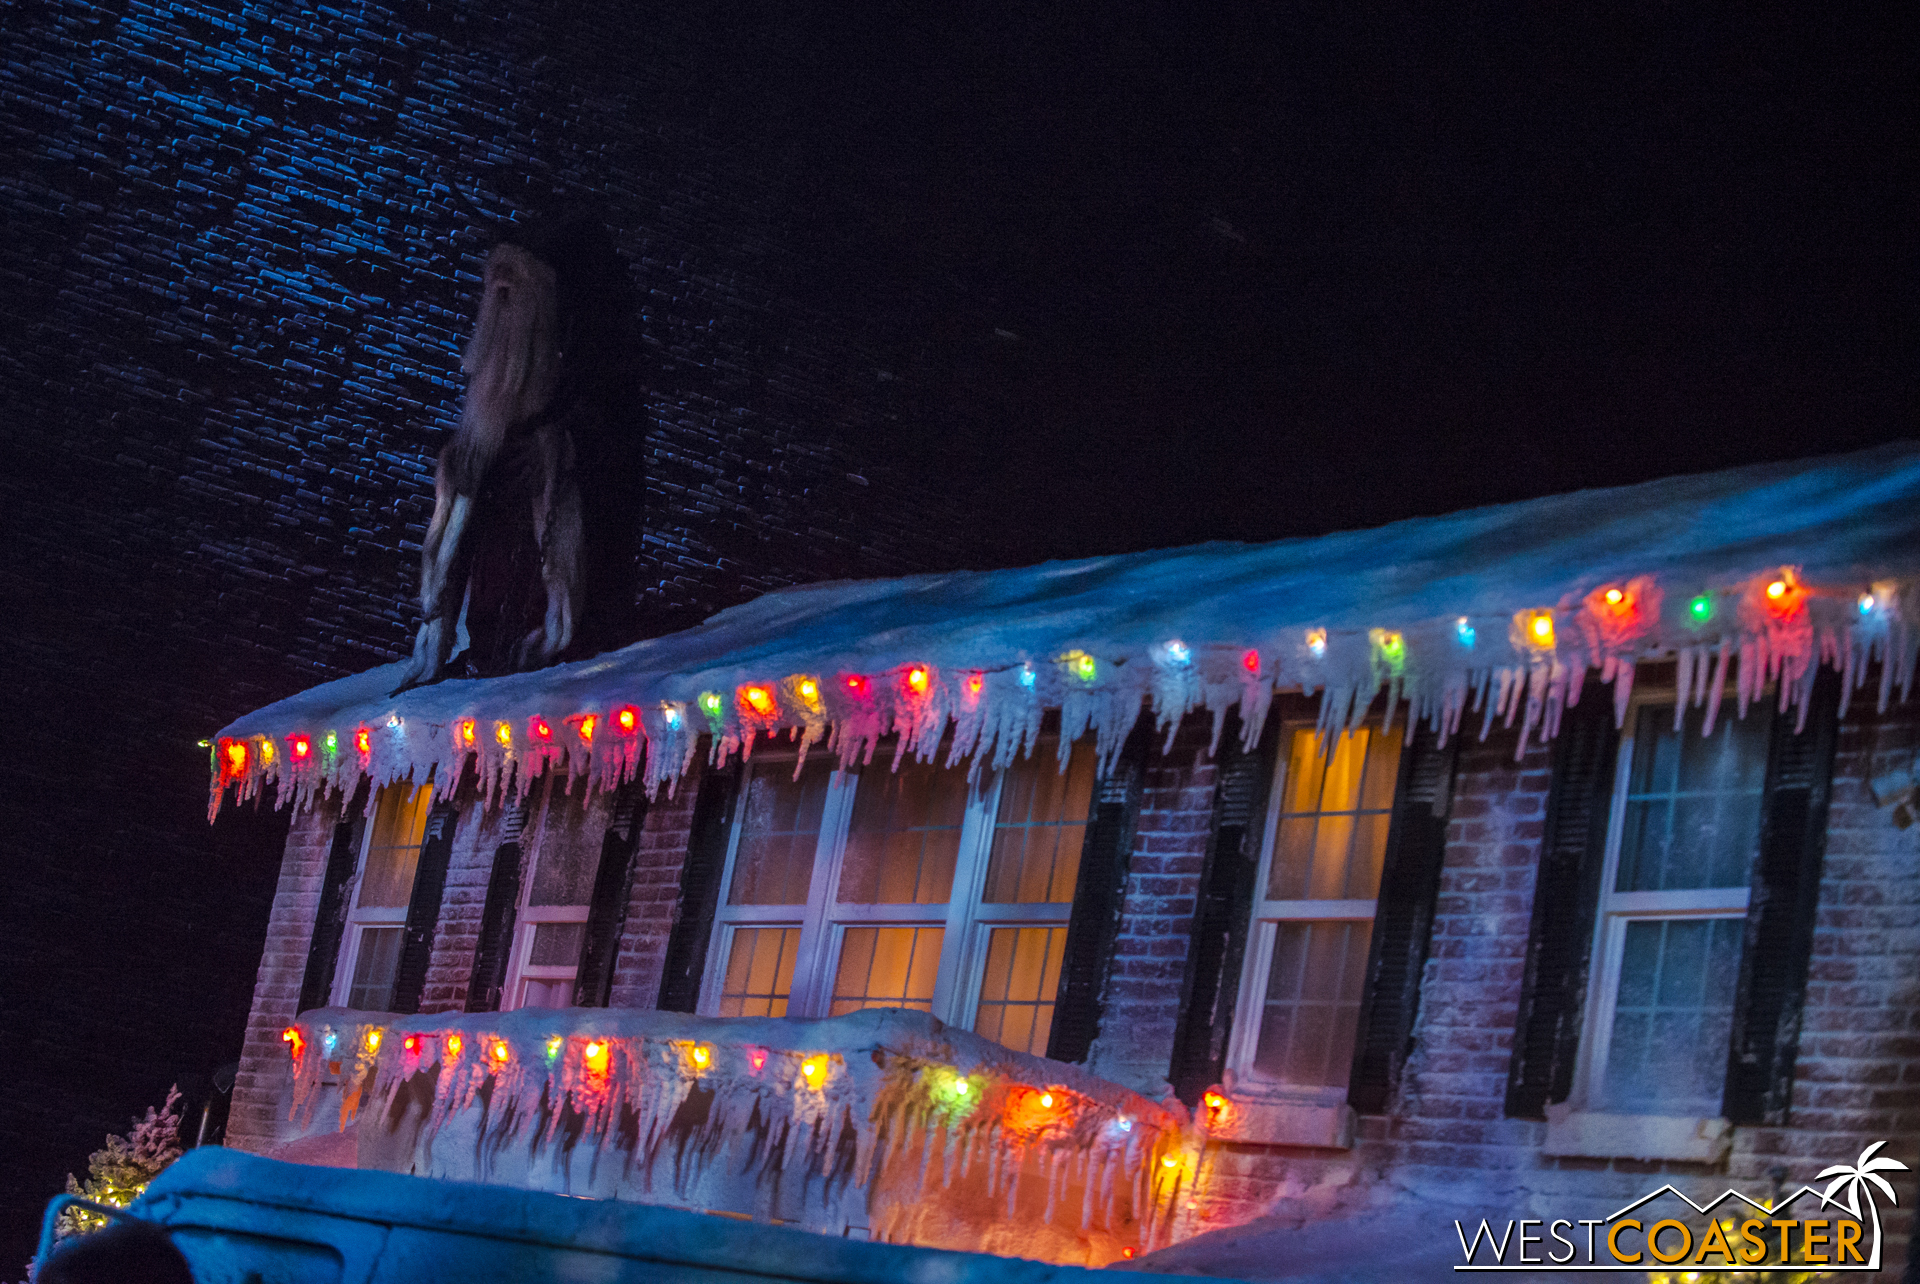  Ont he heels of the Dark Christmas scare zone from 2014 and 2015 comes Krampus. 